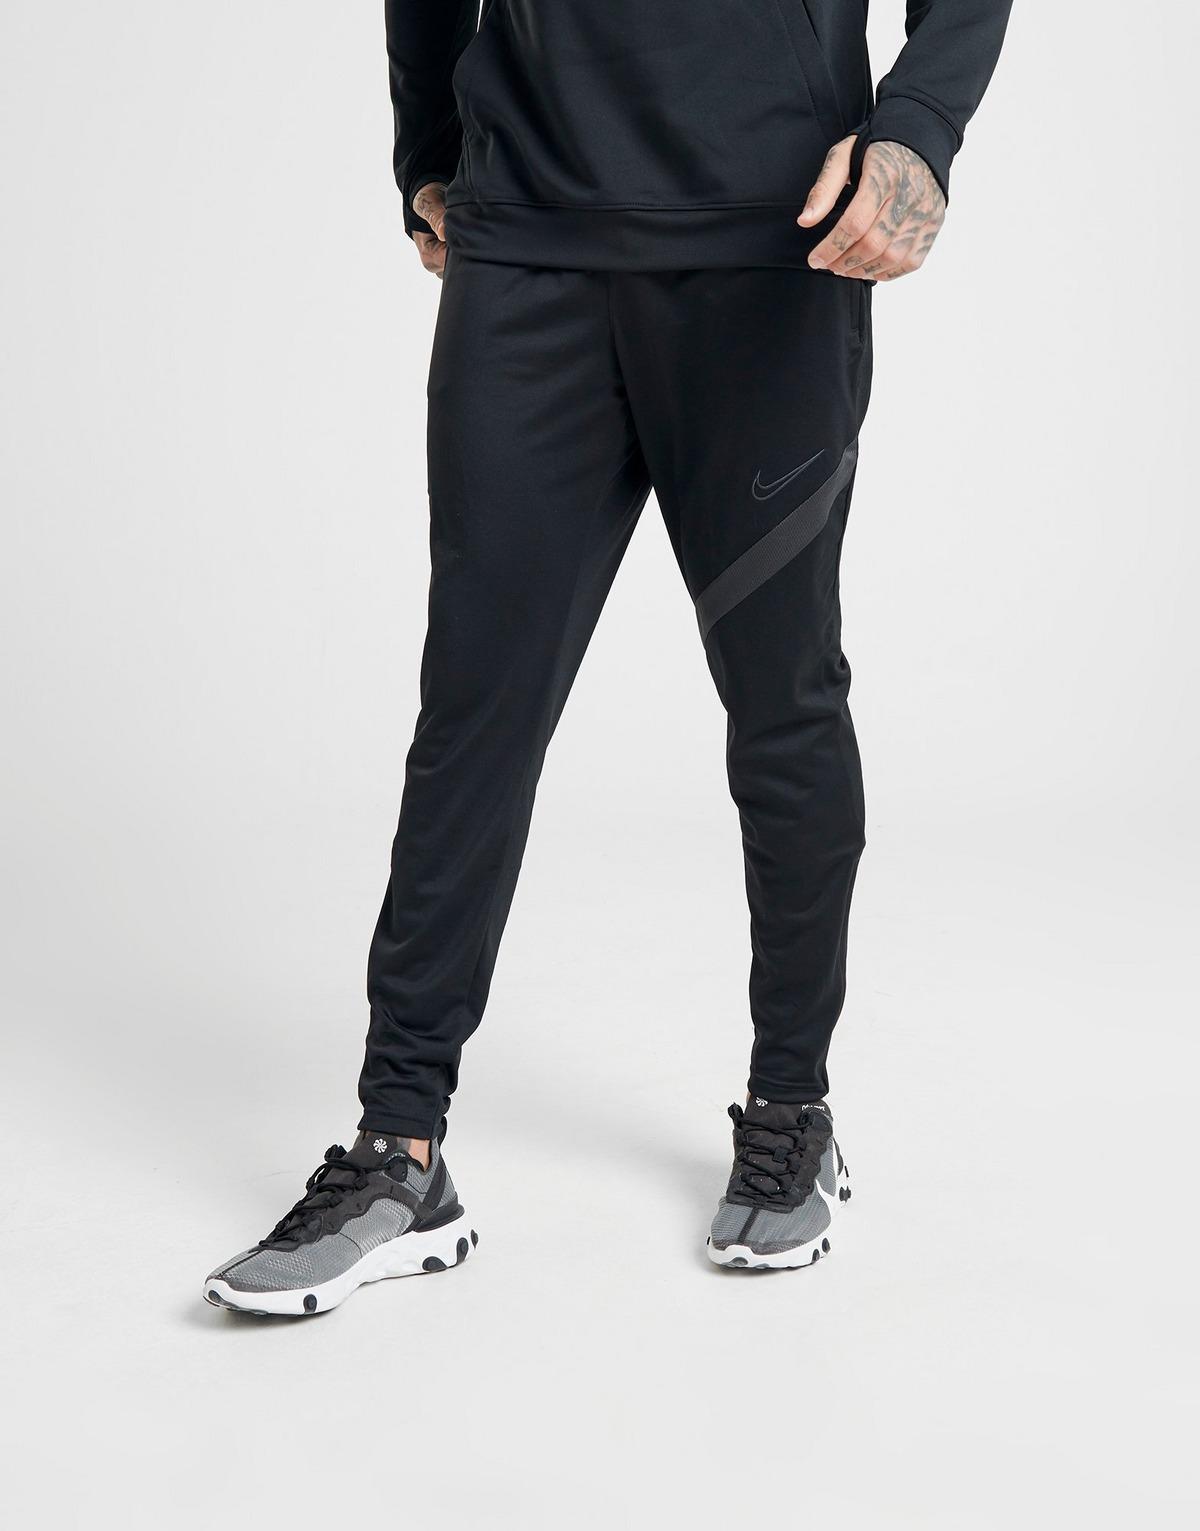 Nike Next Gen Academy Track Pants Black Factory Sale, UP TO 53% OFF |  www.apmusicales.com